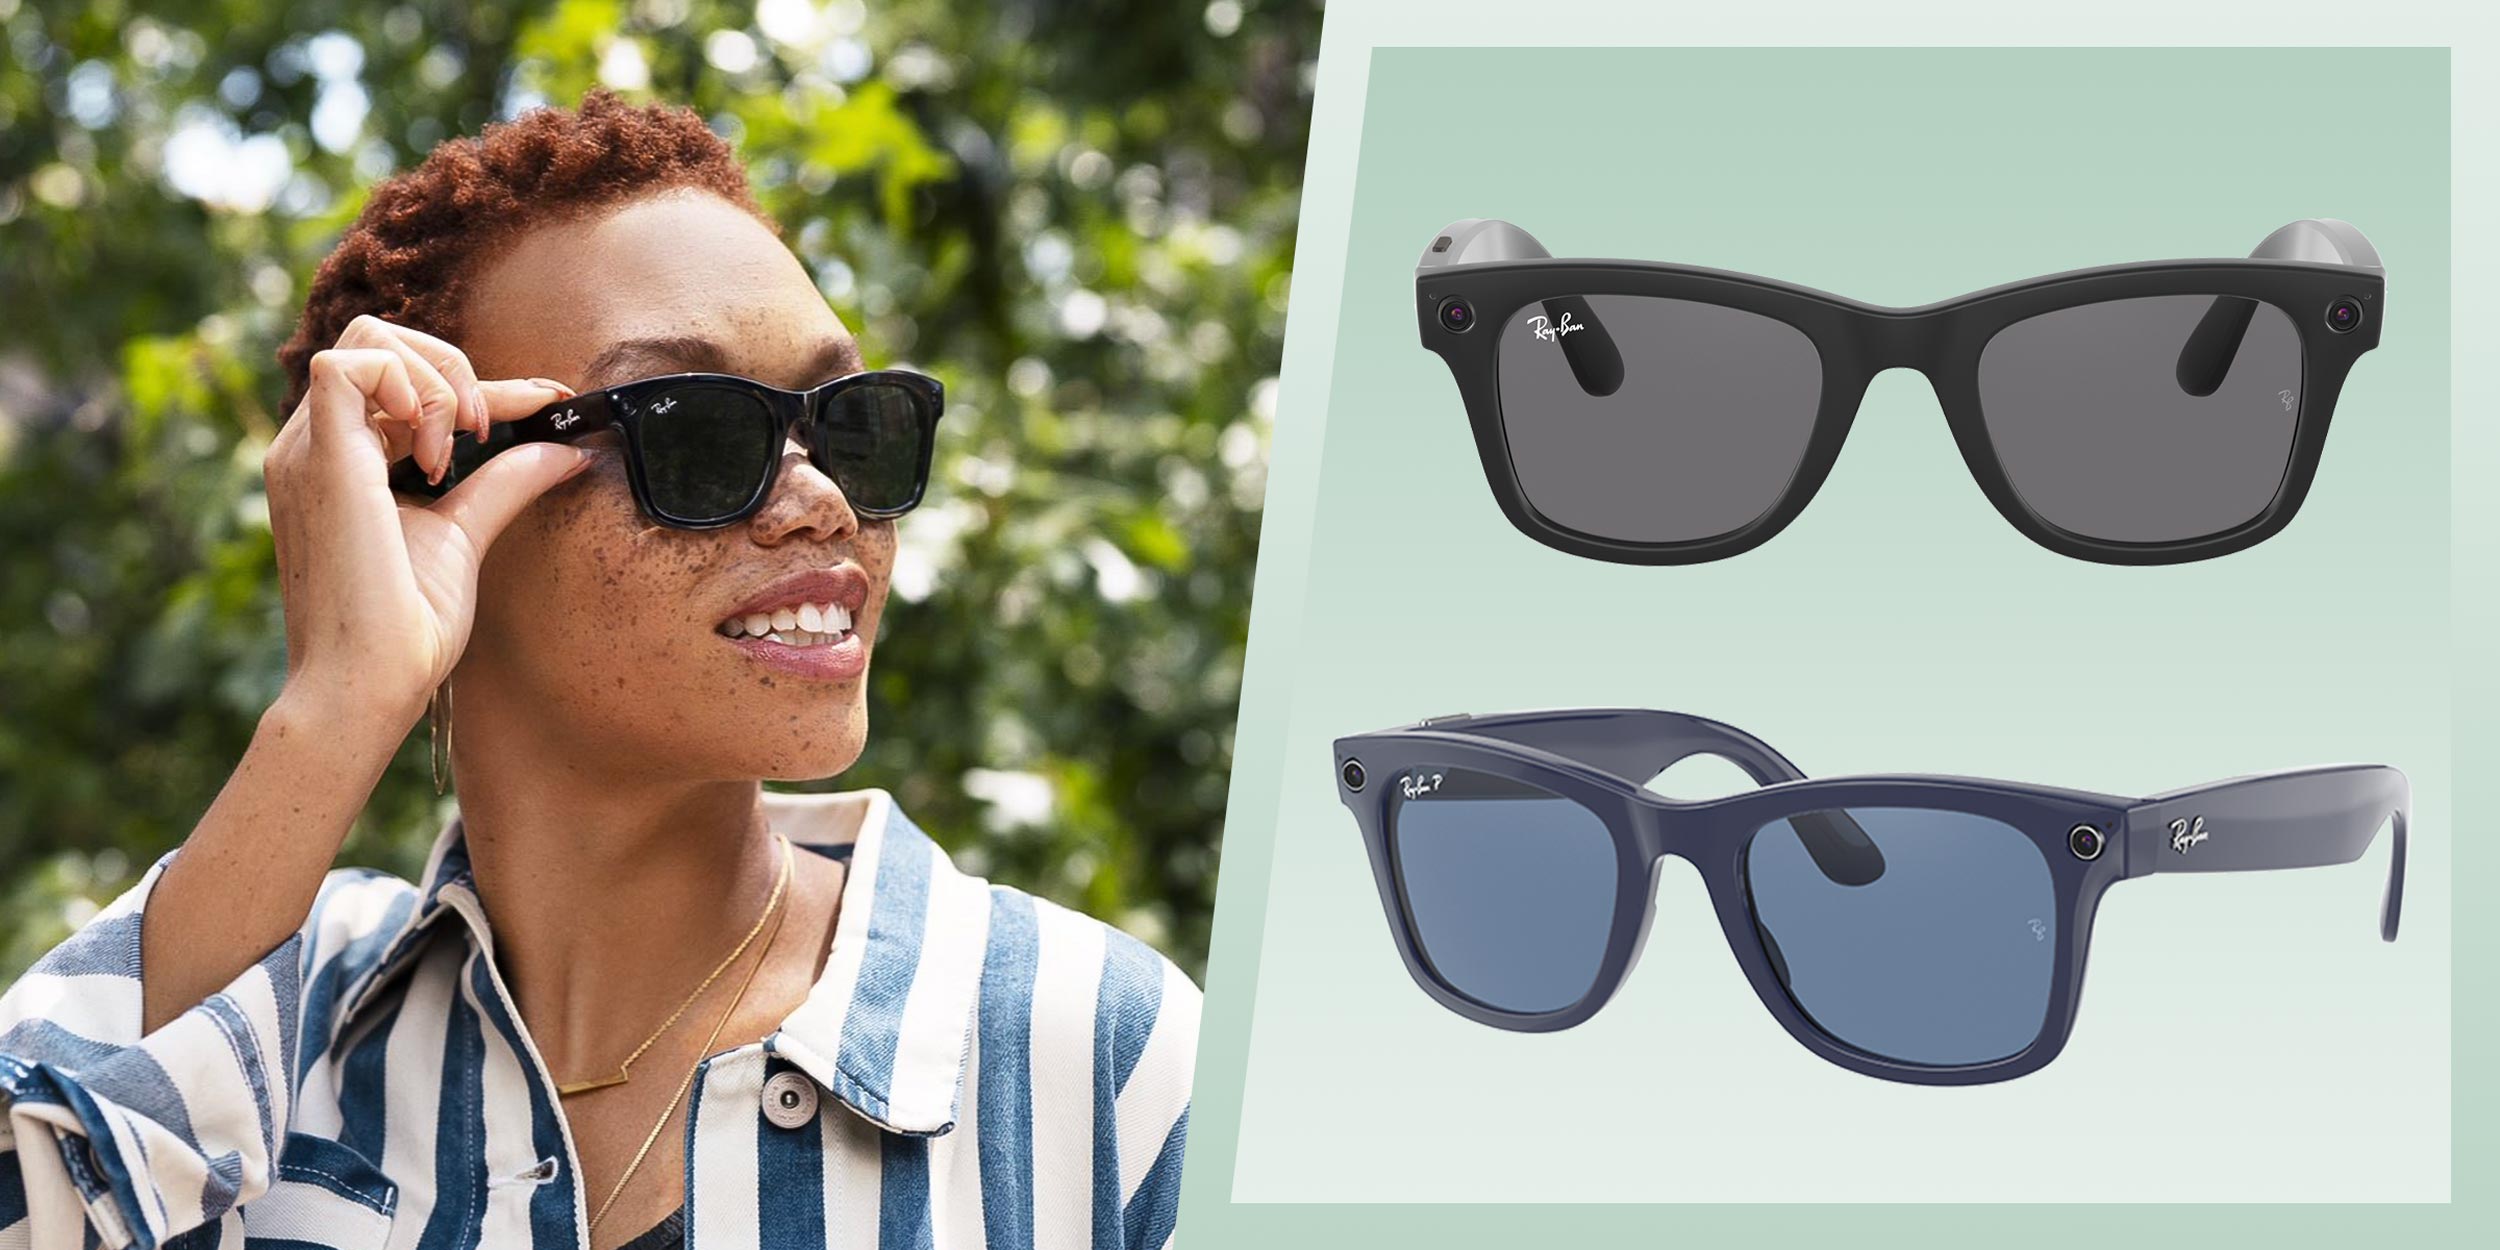 What Do Ray-Ban Smart Glasses Do